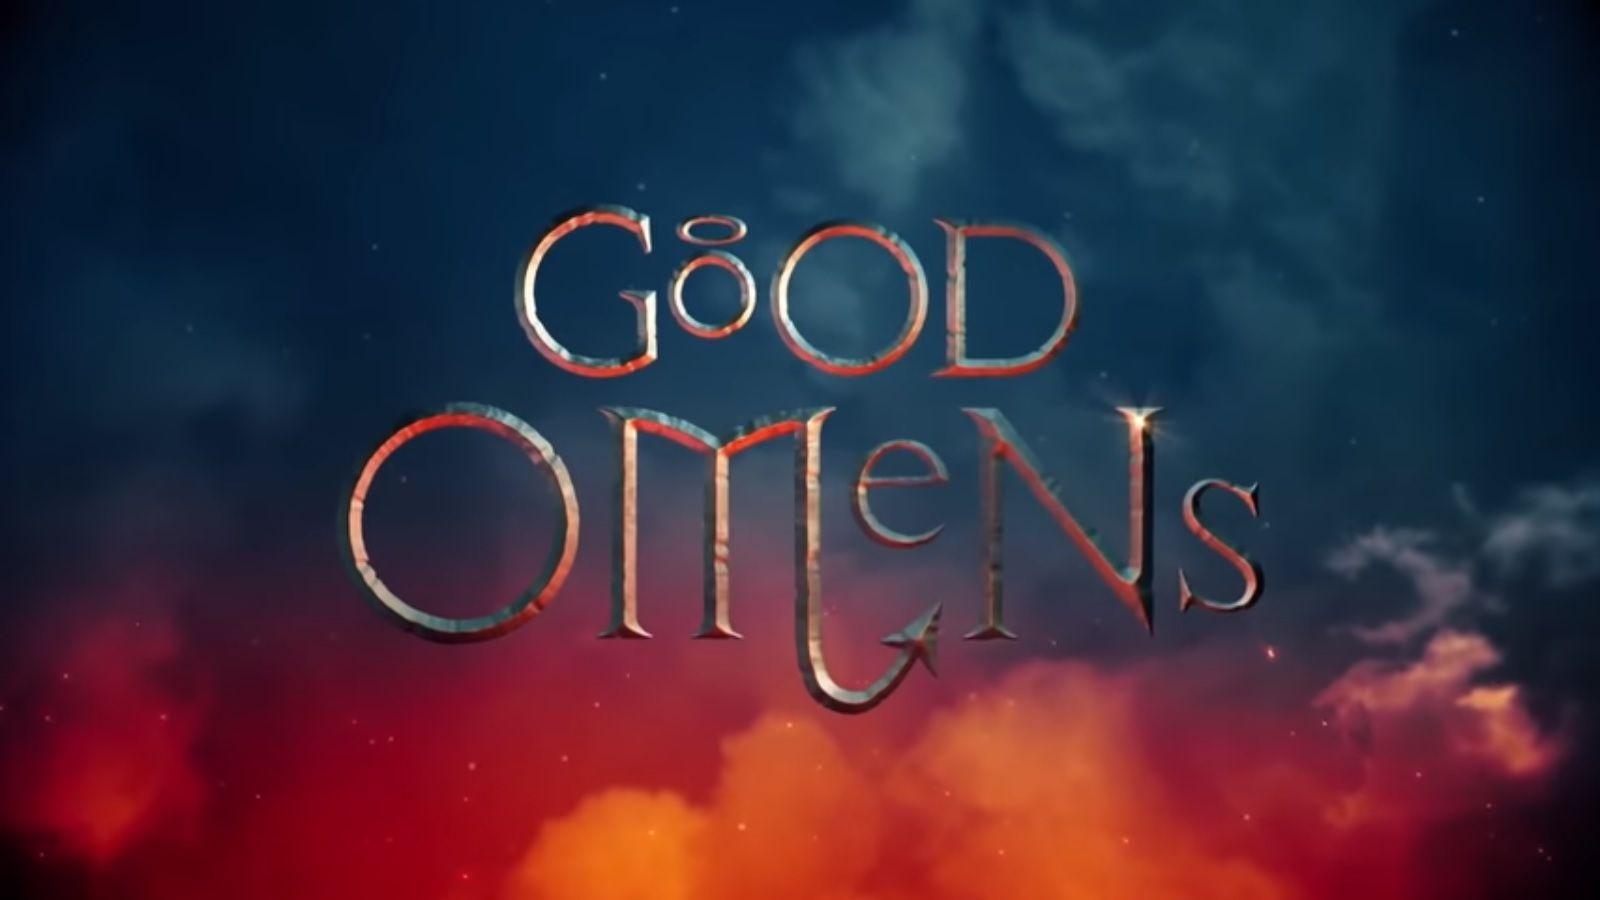 Good Omens Wallpapers Top Free Good Omens Backgrounds Wallpaperaccess 7302